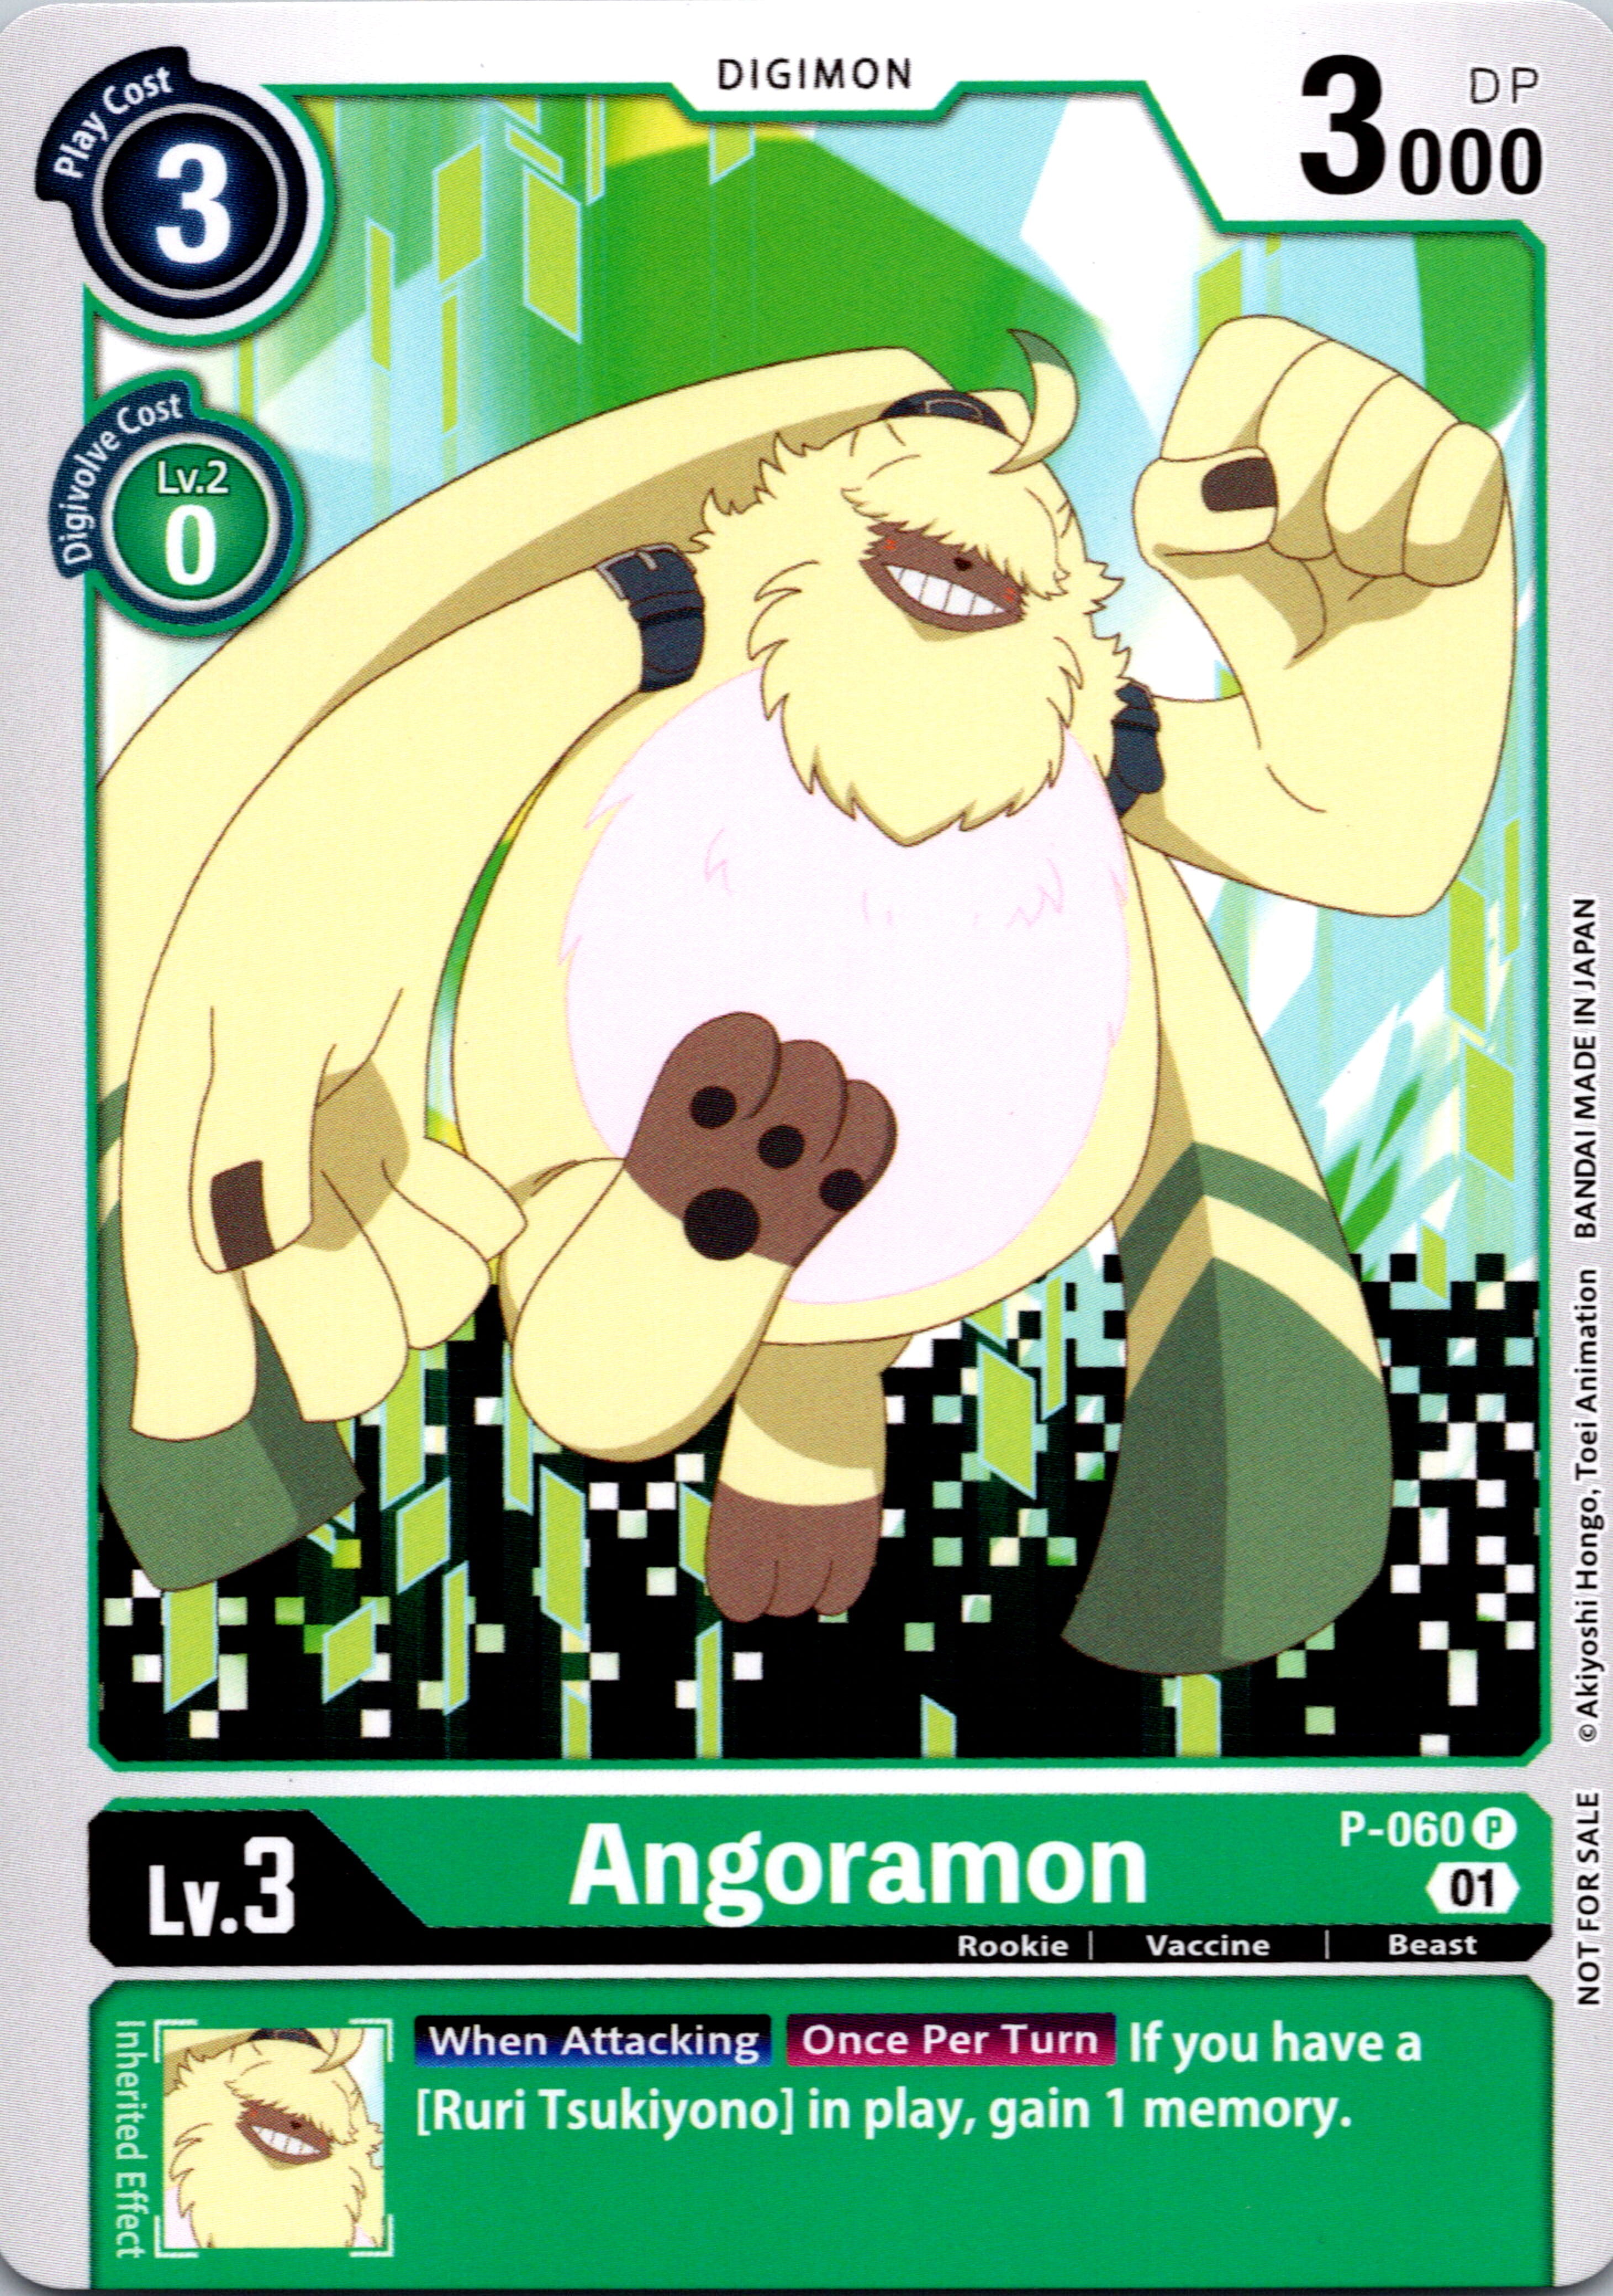 Angoramon (Official Tournament Pack Vol.5) [P-060] [Digimon Promotion Cards] Normal